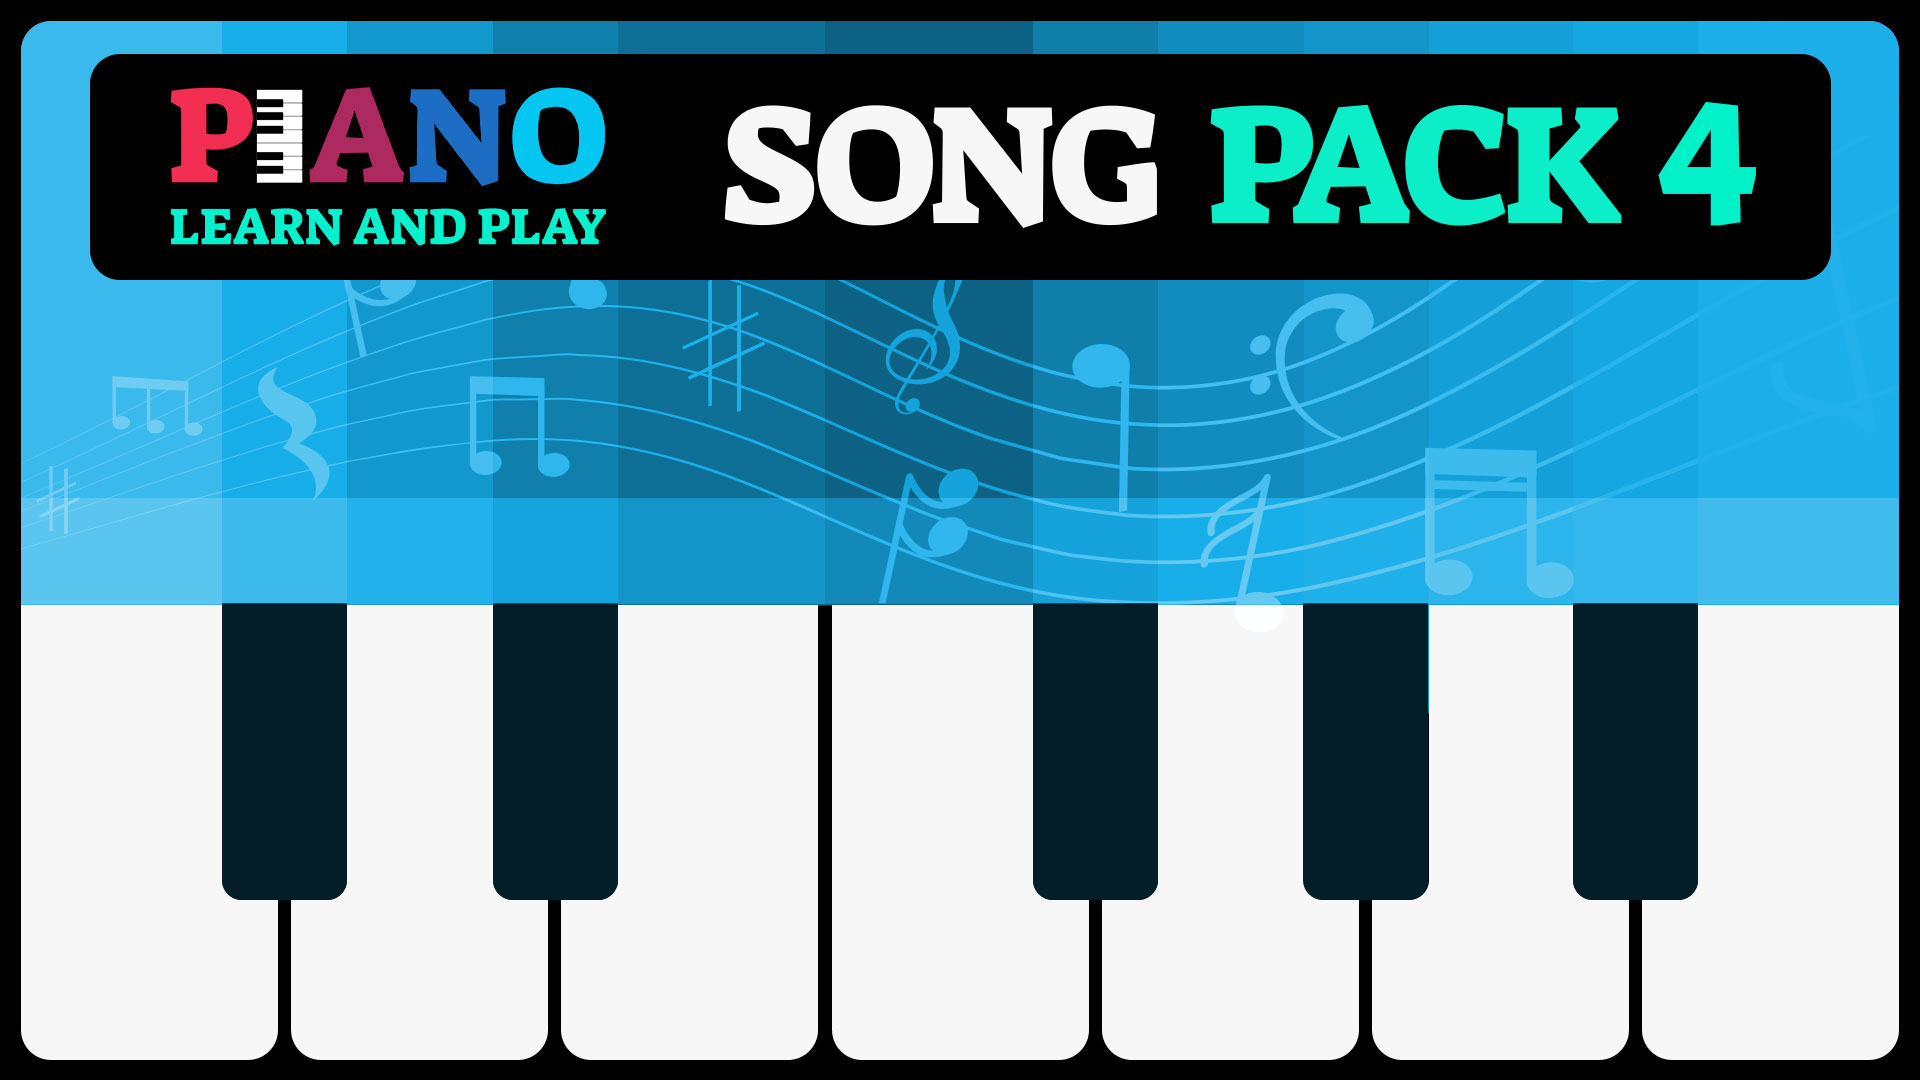 Song Pack 4